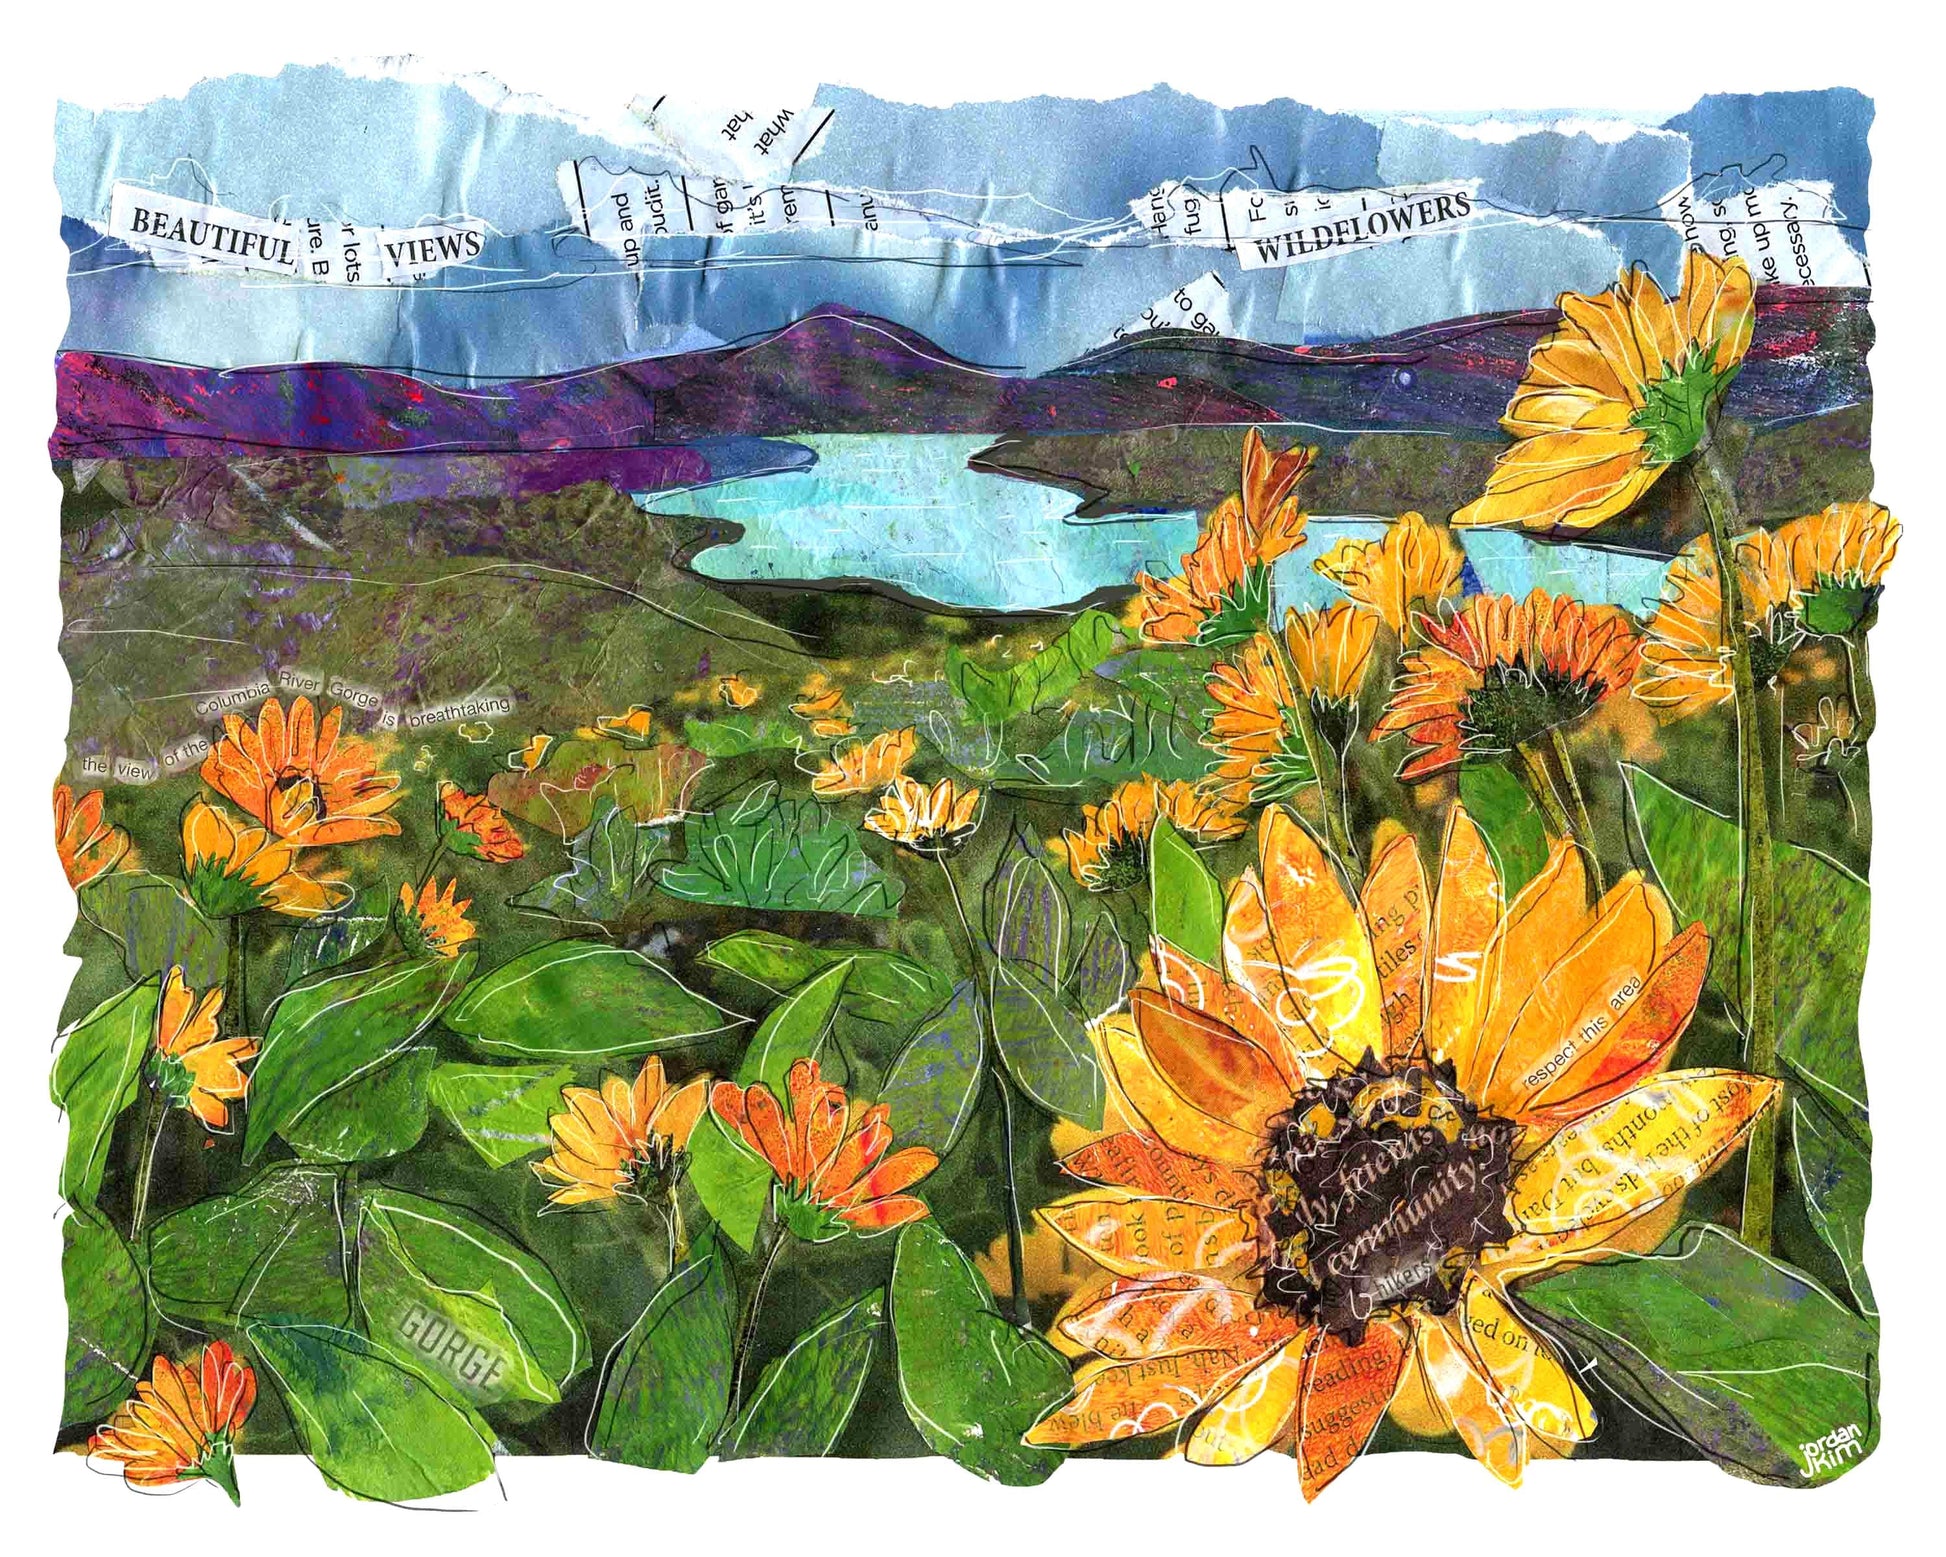 8x10 Art print of a Paper Collage of Balsam Root wildflowers blooming in the Columbia River Gorge - Inspirational Wall Art